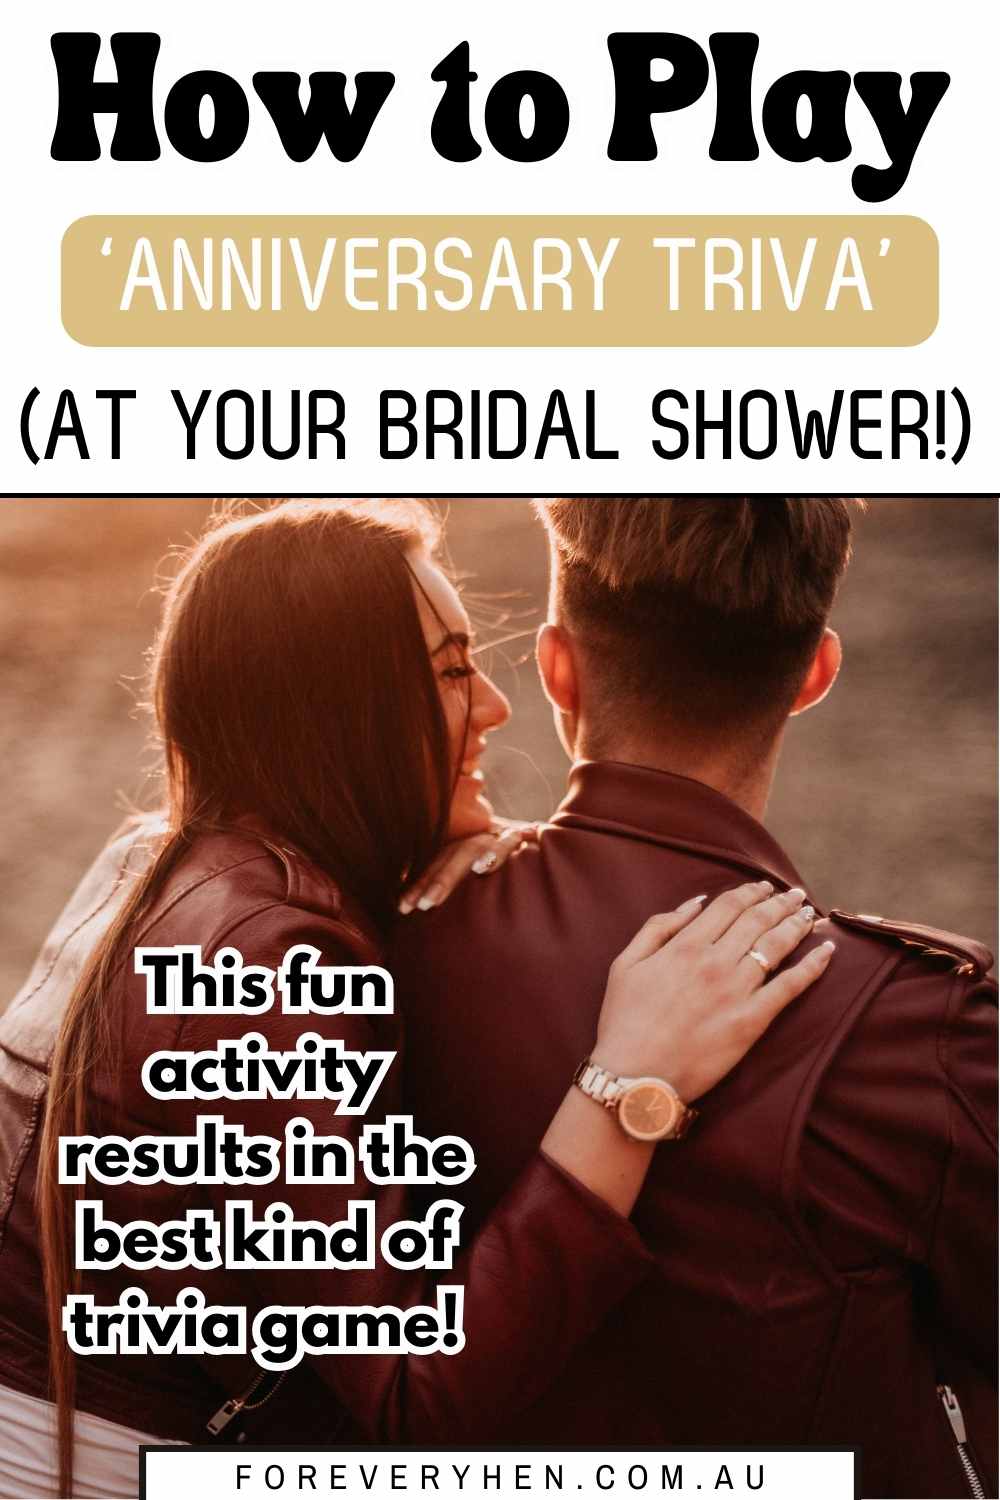 Image of a Couple holding hands. Text overlay: Forget anniversary wishes, it's time to play anniversary trivia!